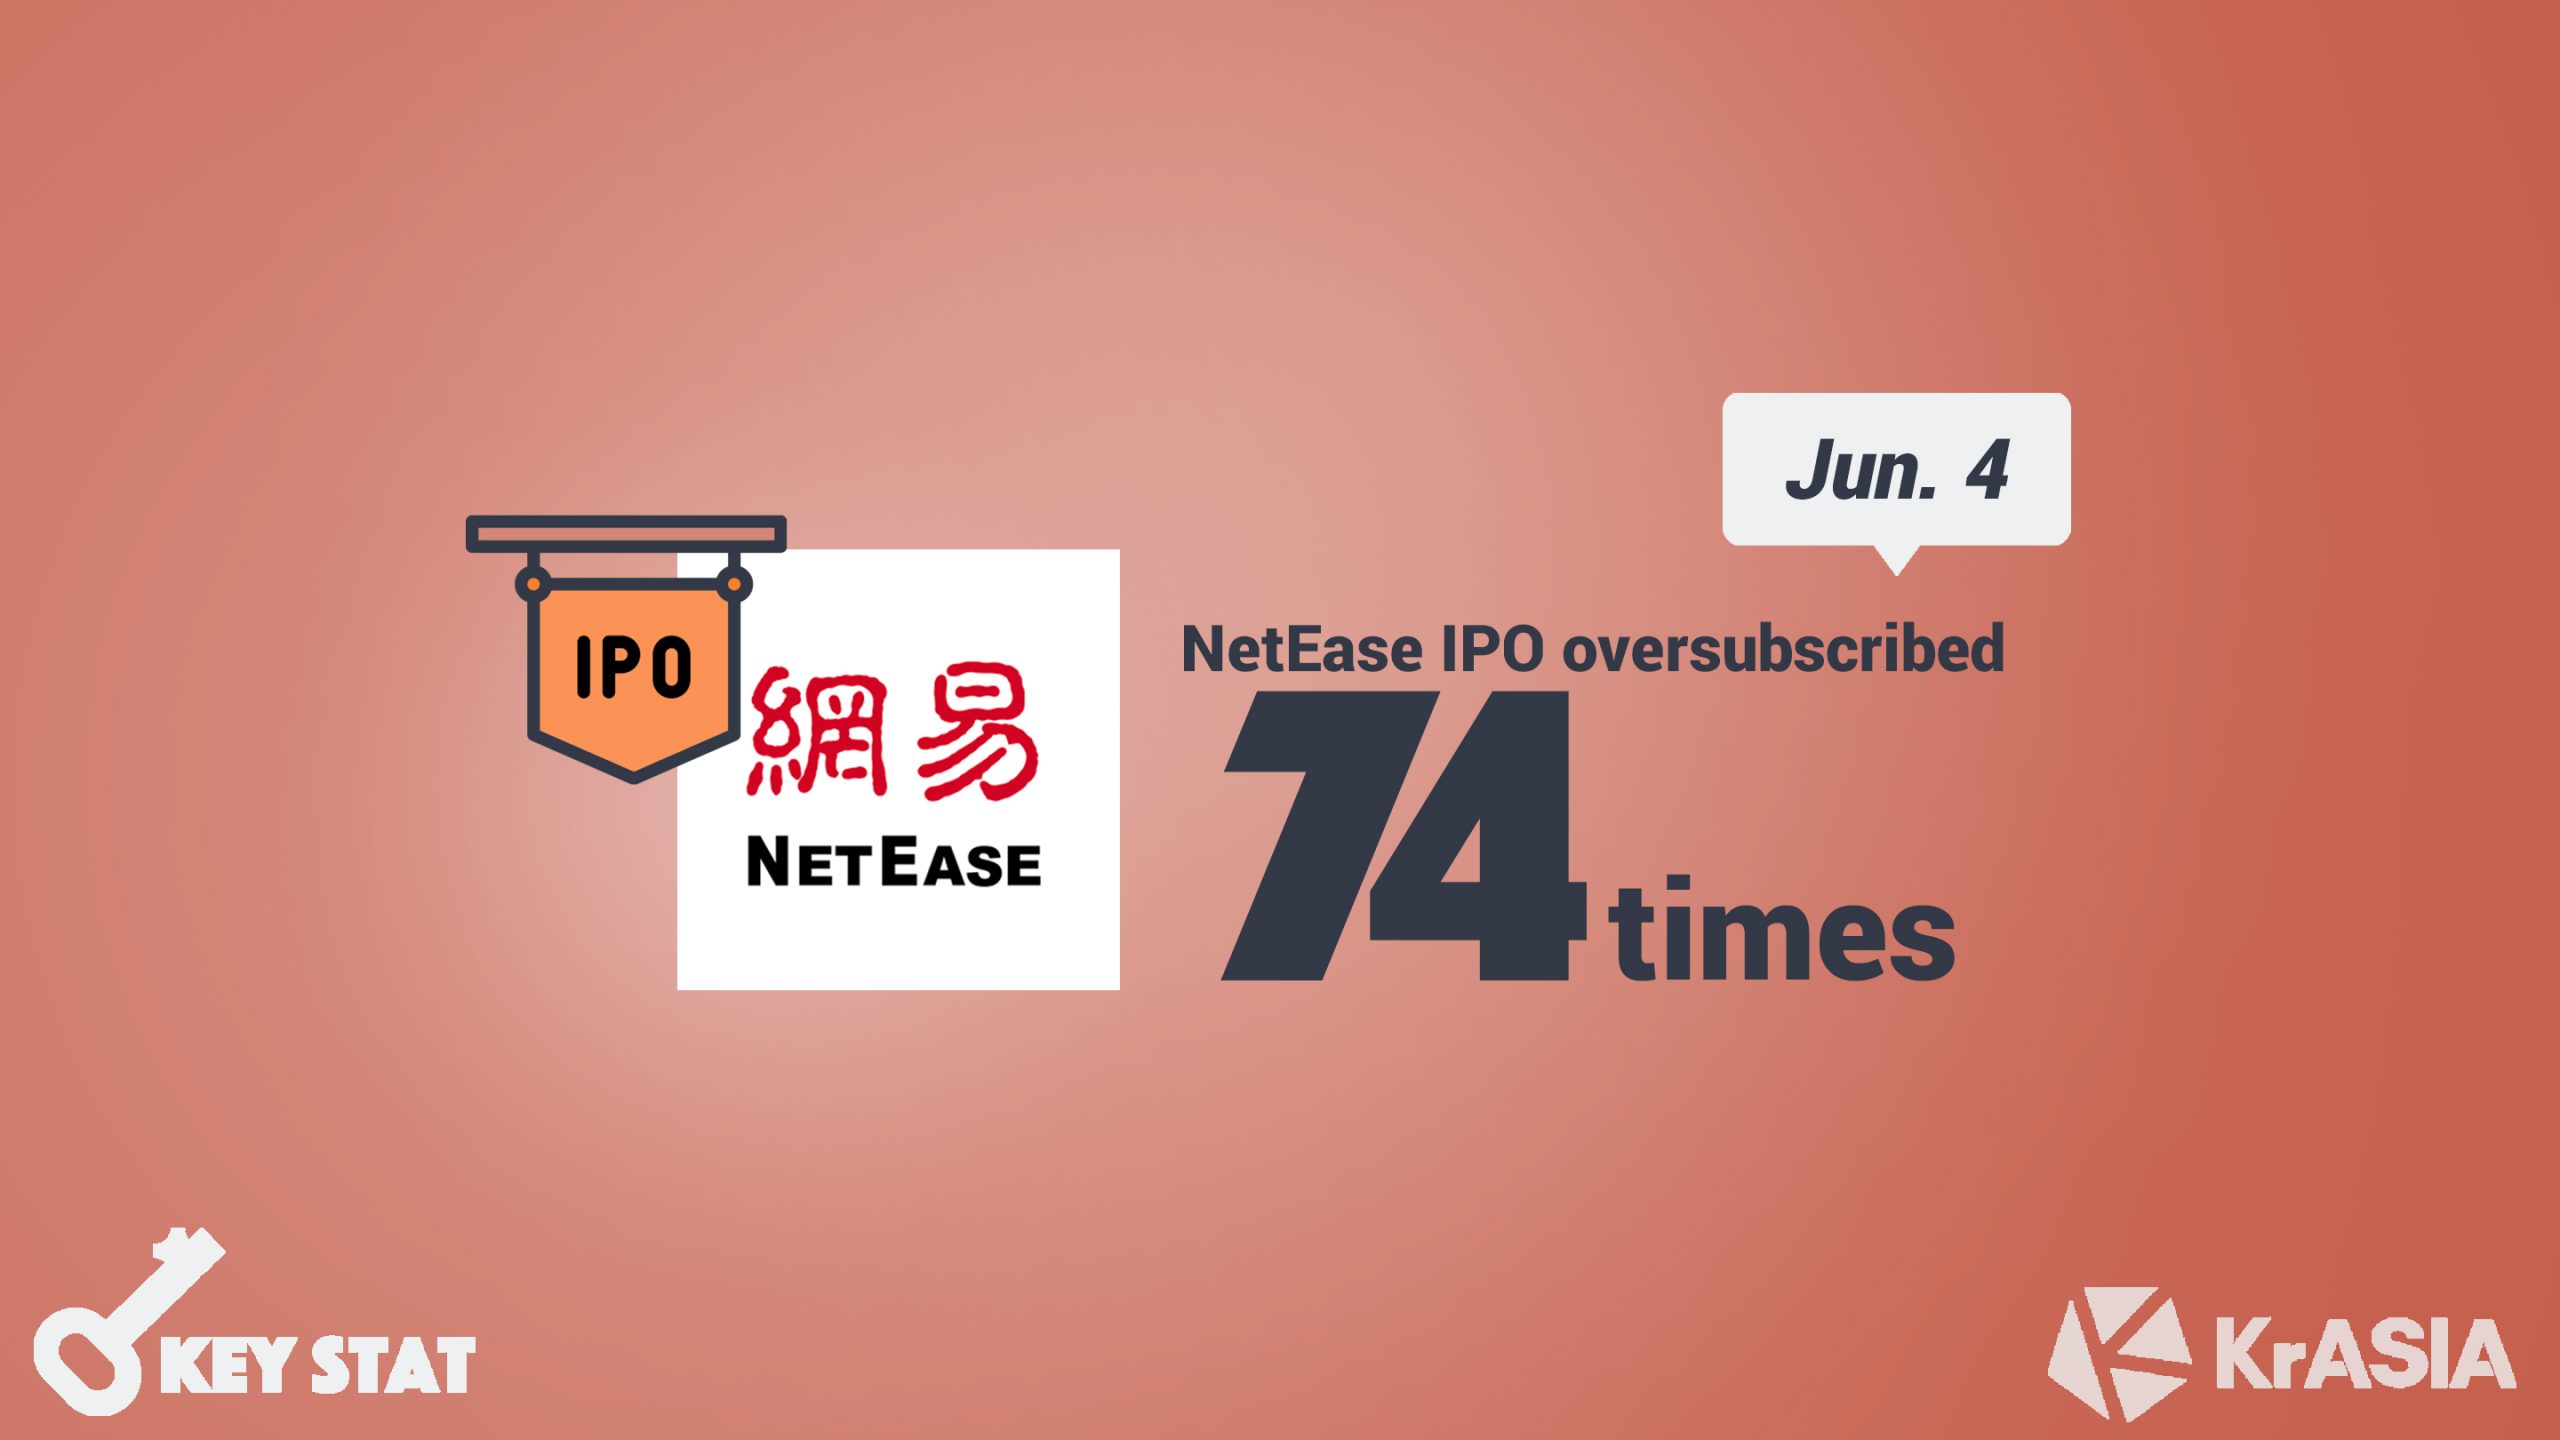 KEY STAT | NetEase oversubscribed 74 times in first two day of IPO